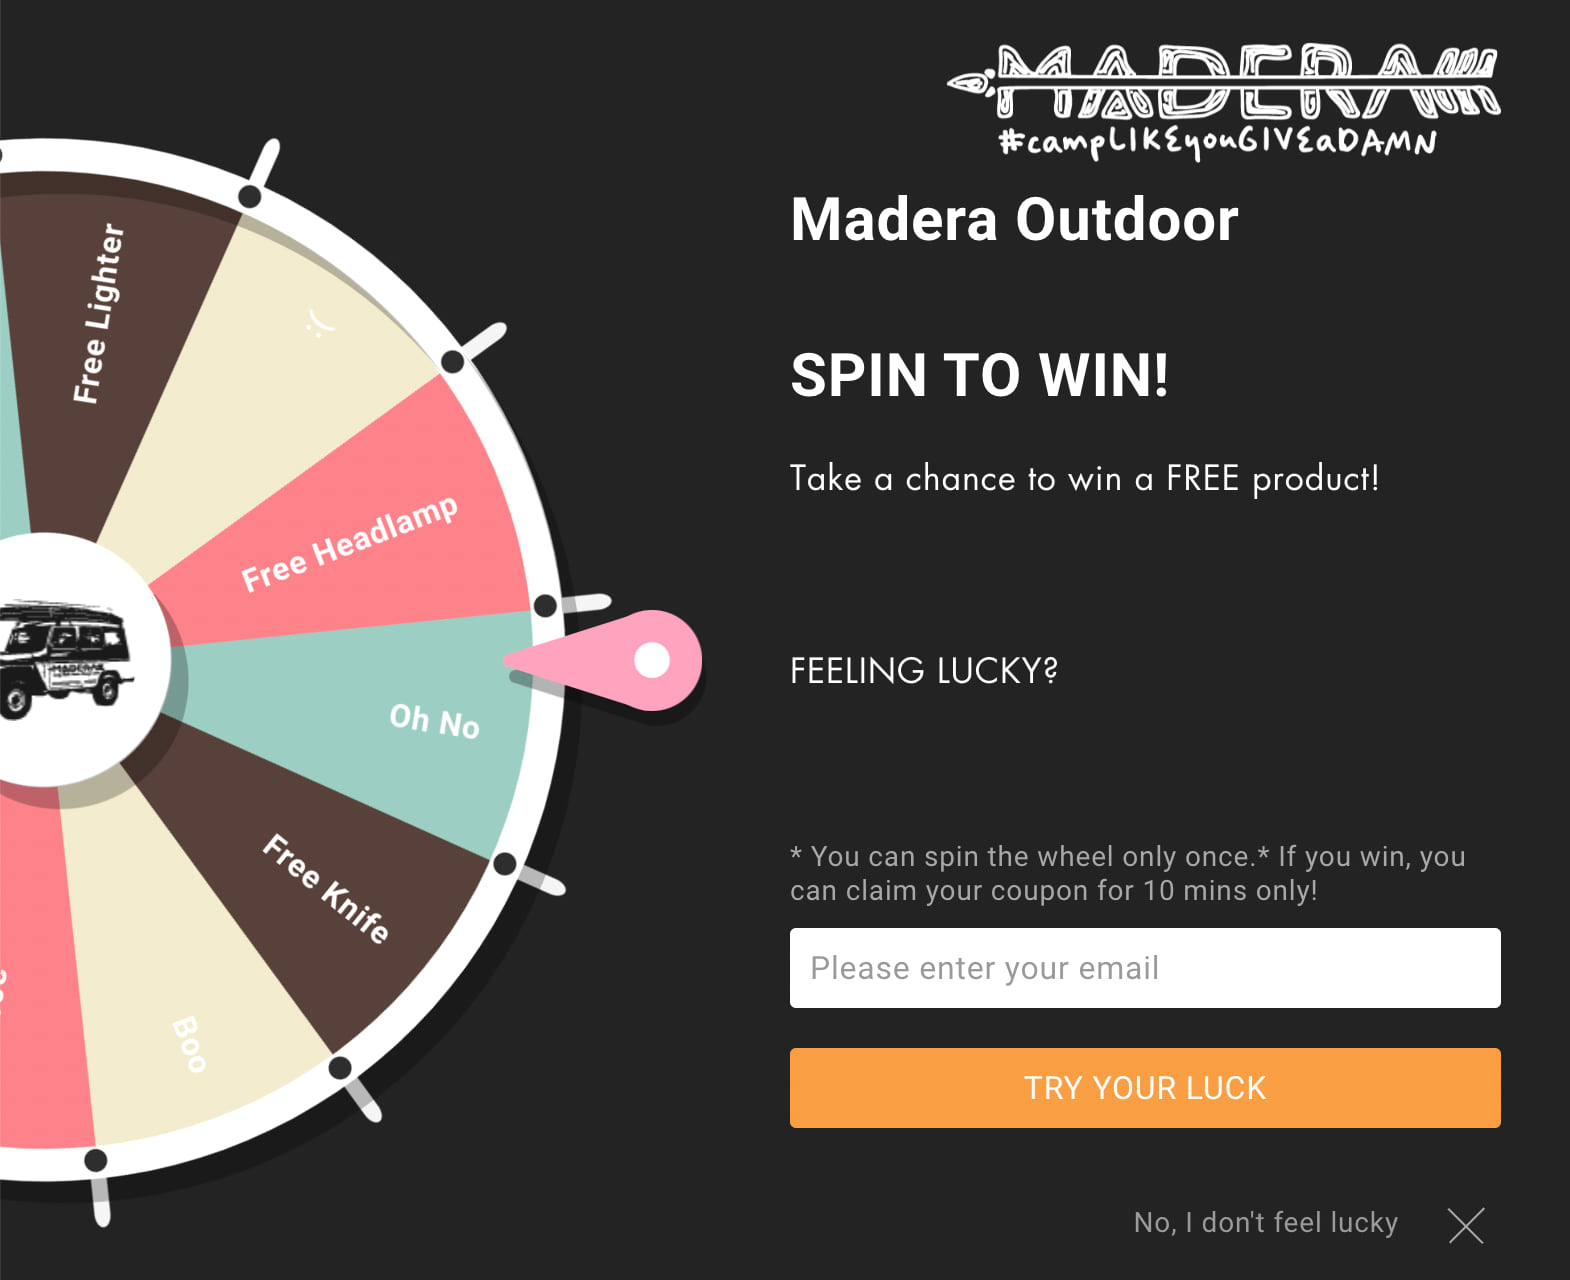 How to use Madera Outdoor coupons